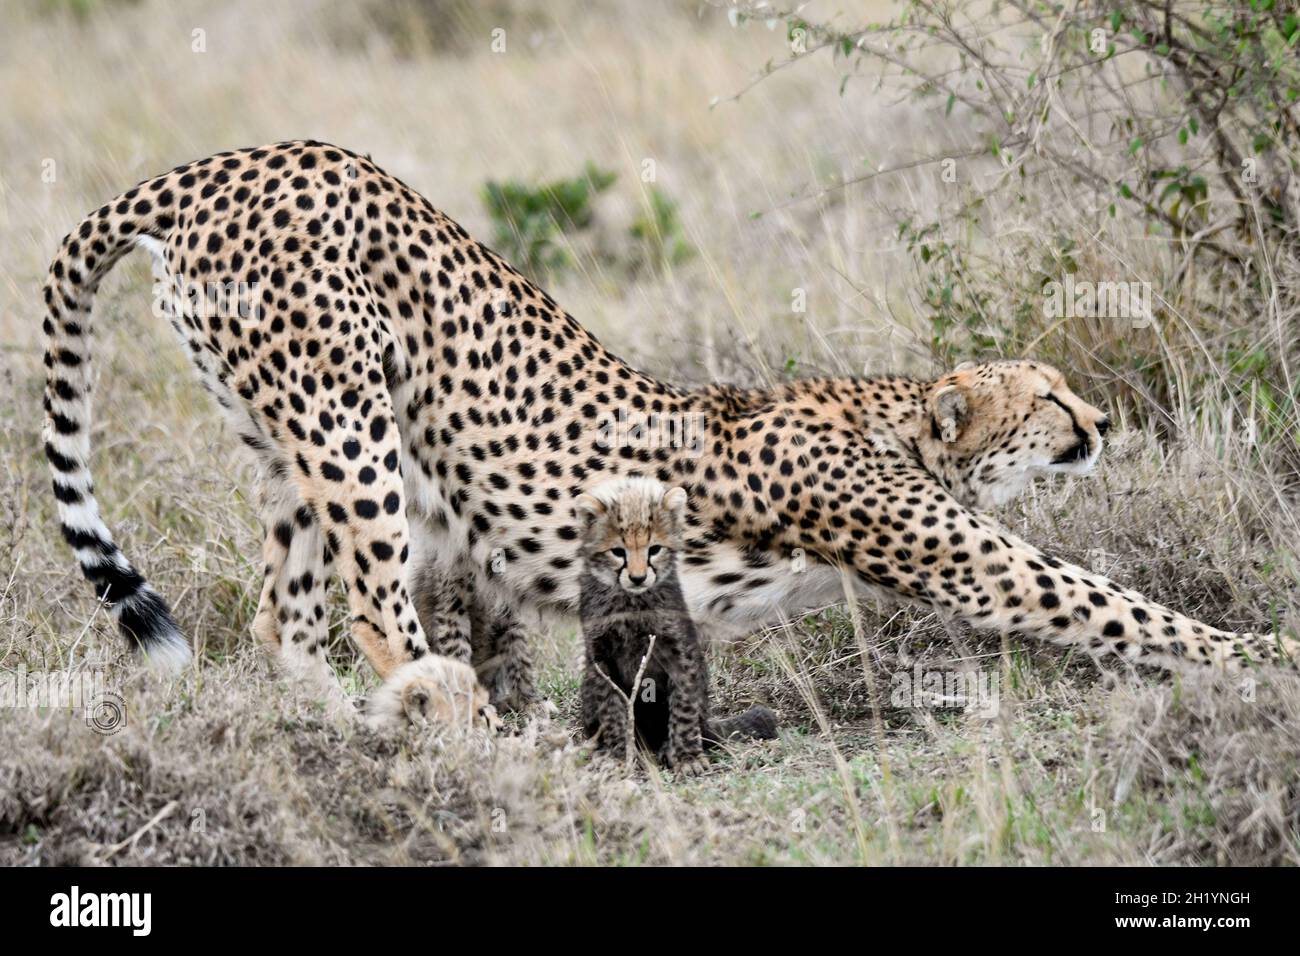 The mama cheetah can be seen standing protectively in front of her young. MAASAI MARA NATIONAL RESERVE, KENYA: THIS BRAVE cheetah mum was captured cha Stock Photo